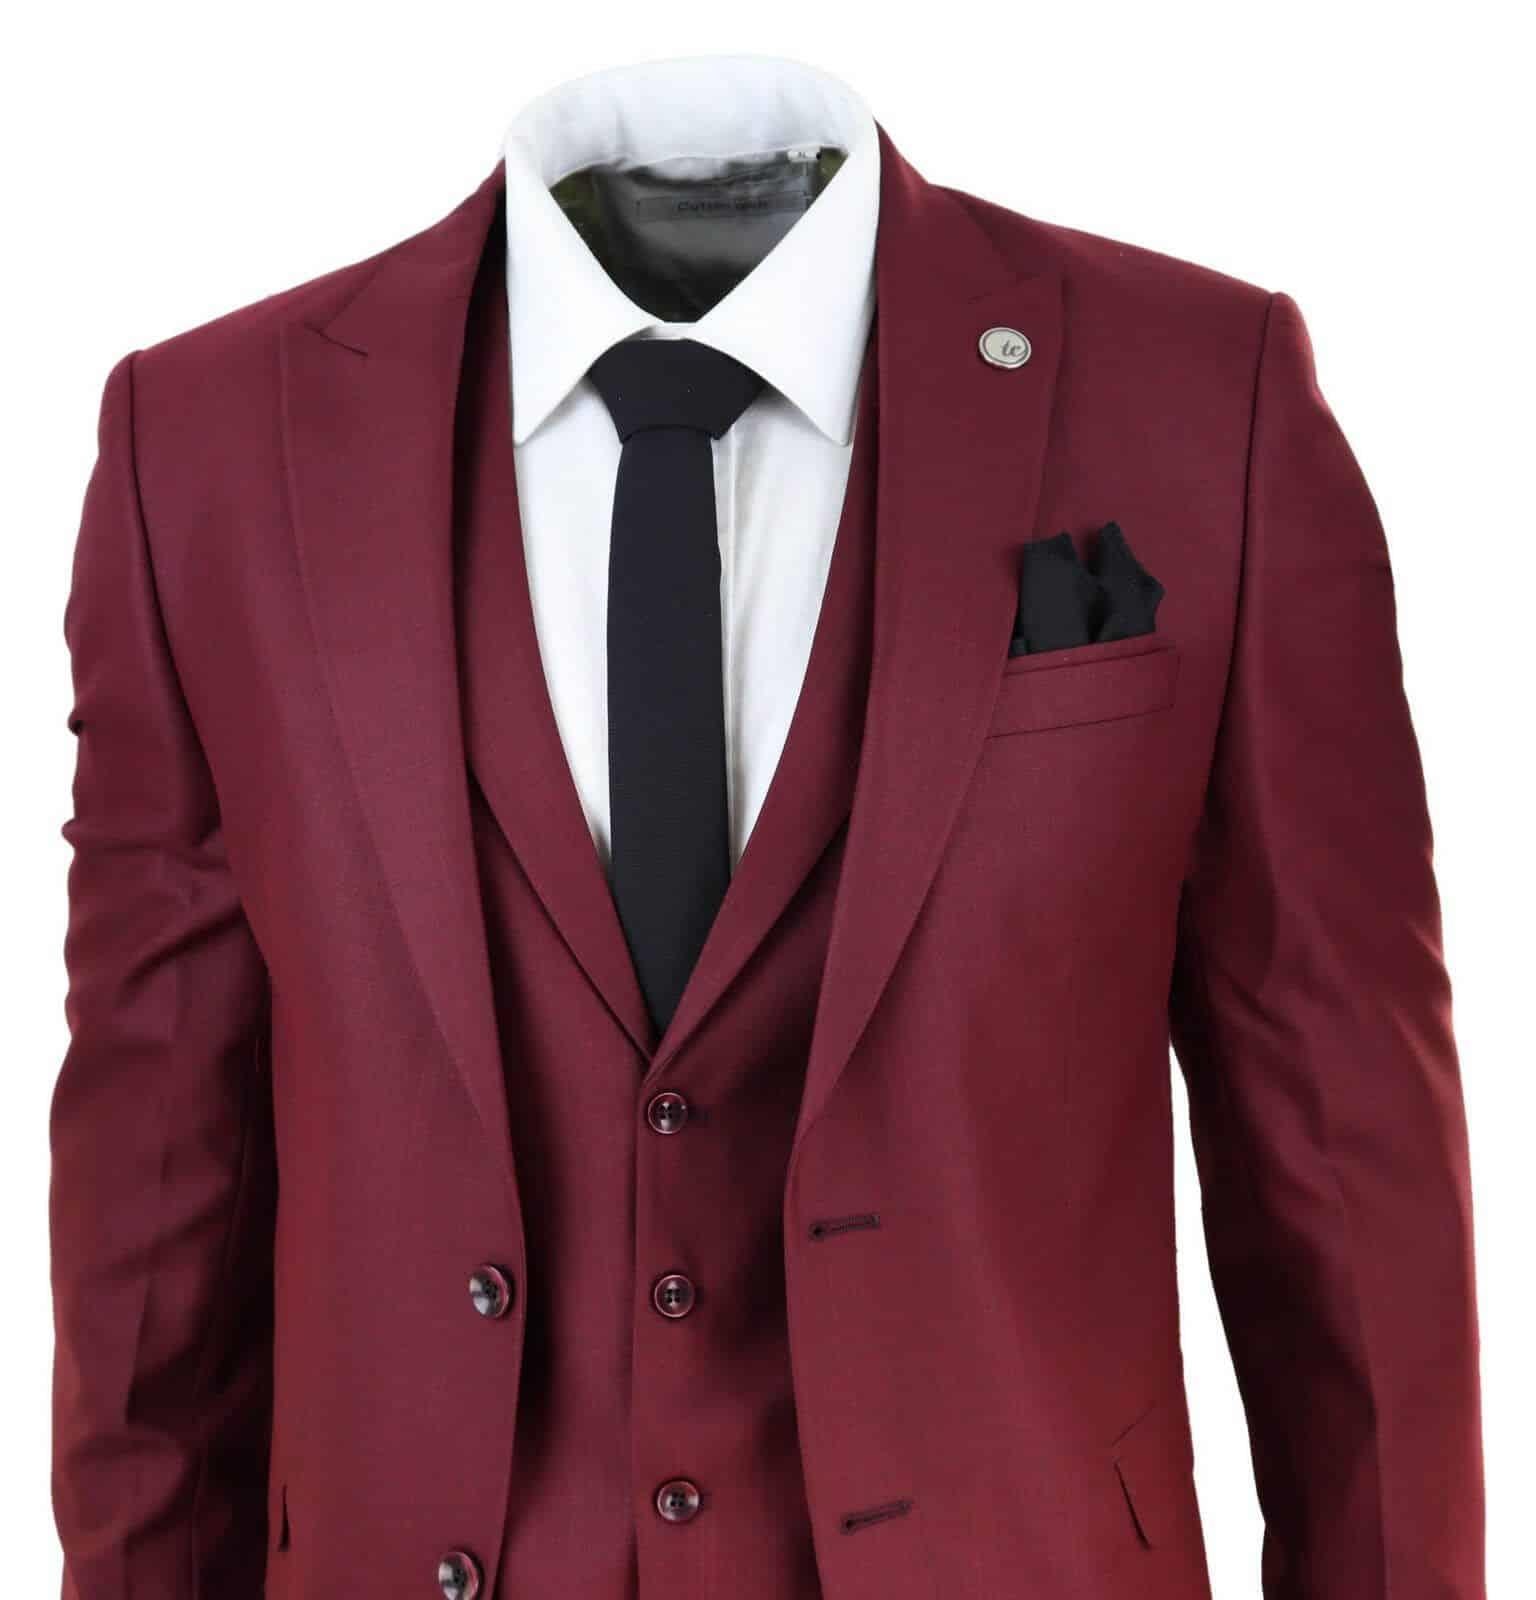 New Mens 3 Piece Suit Plain wine Classic Tailored Fit Smart Casual 1920s Formal